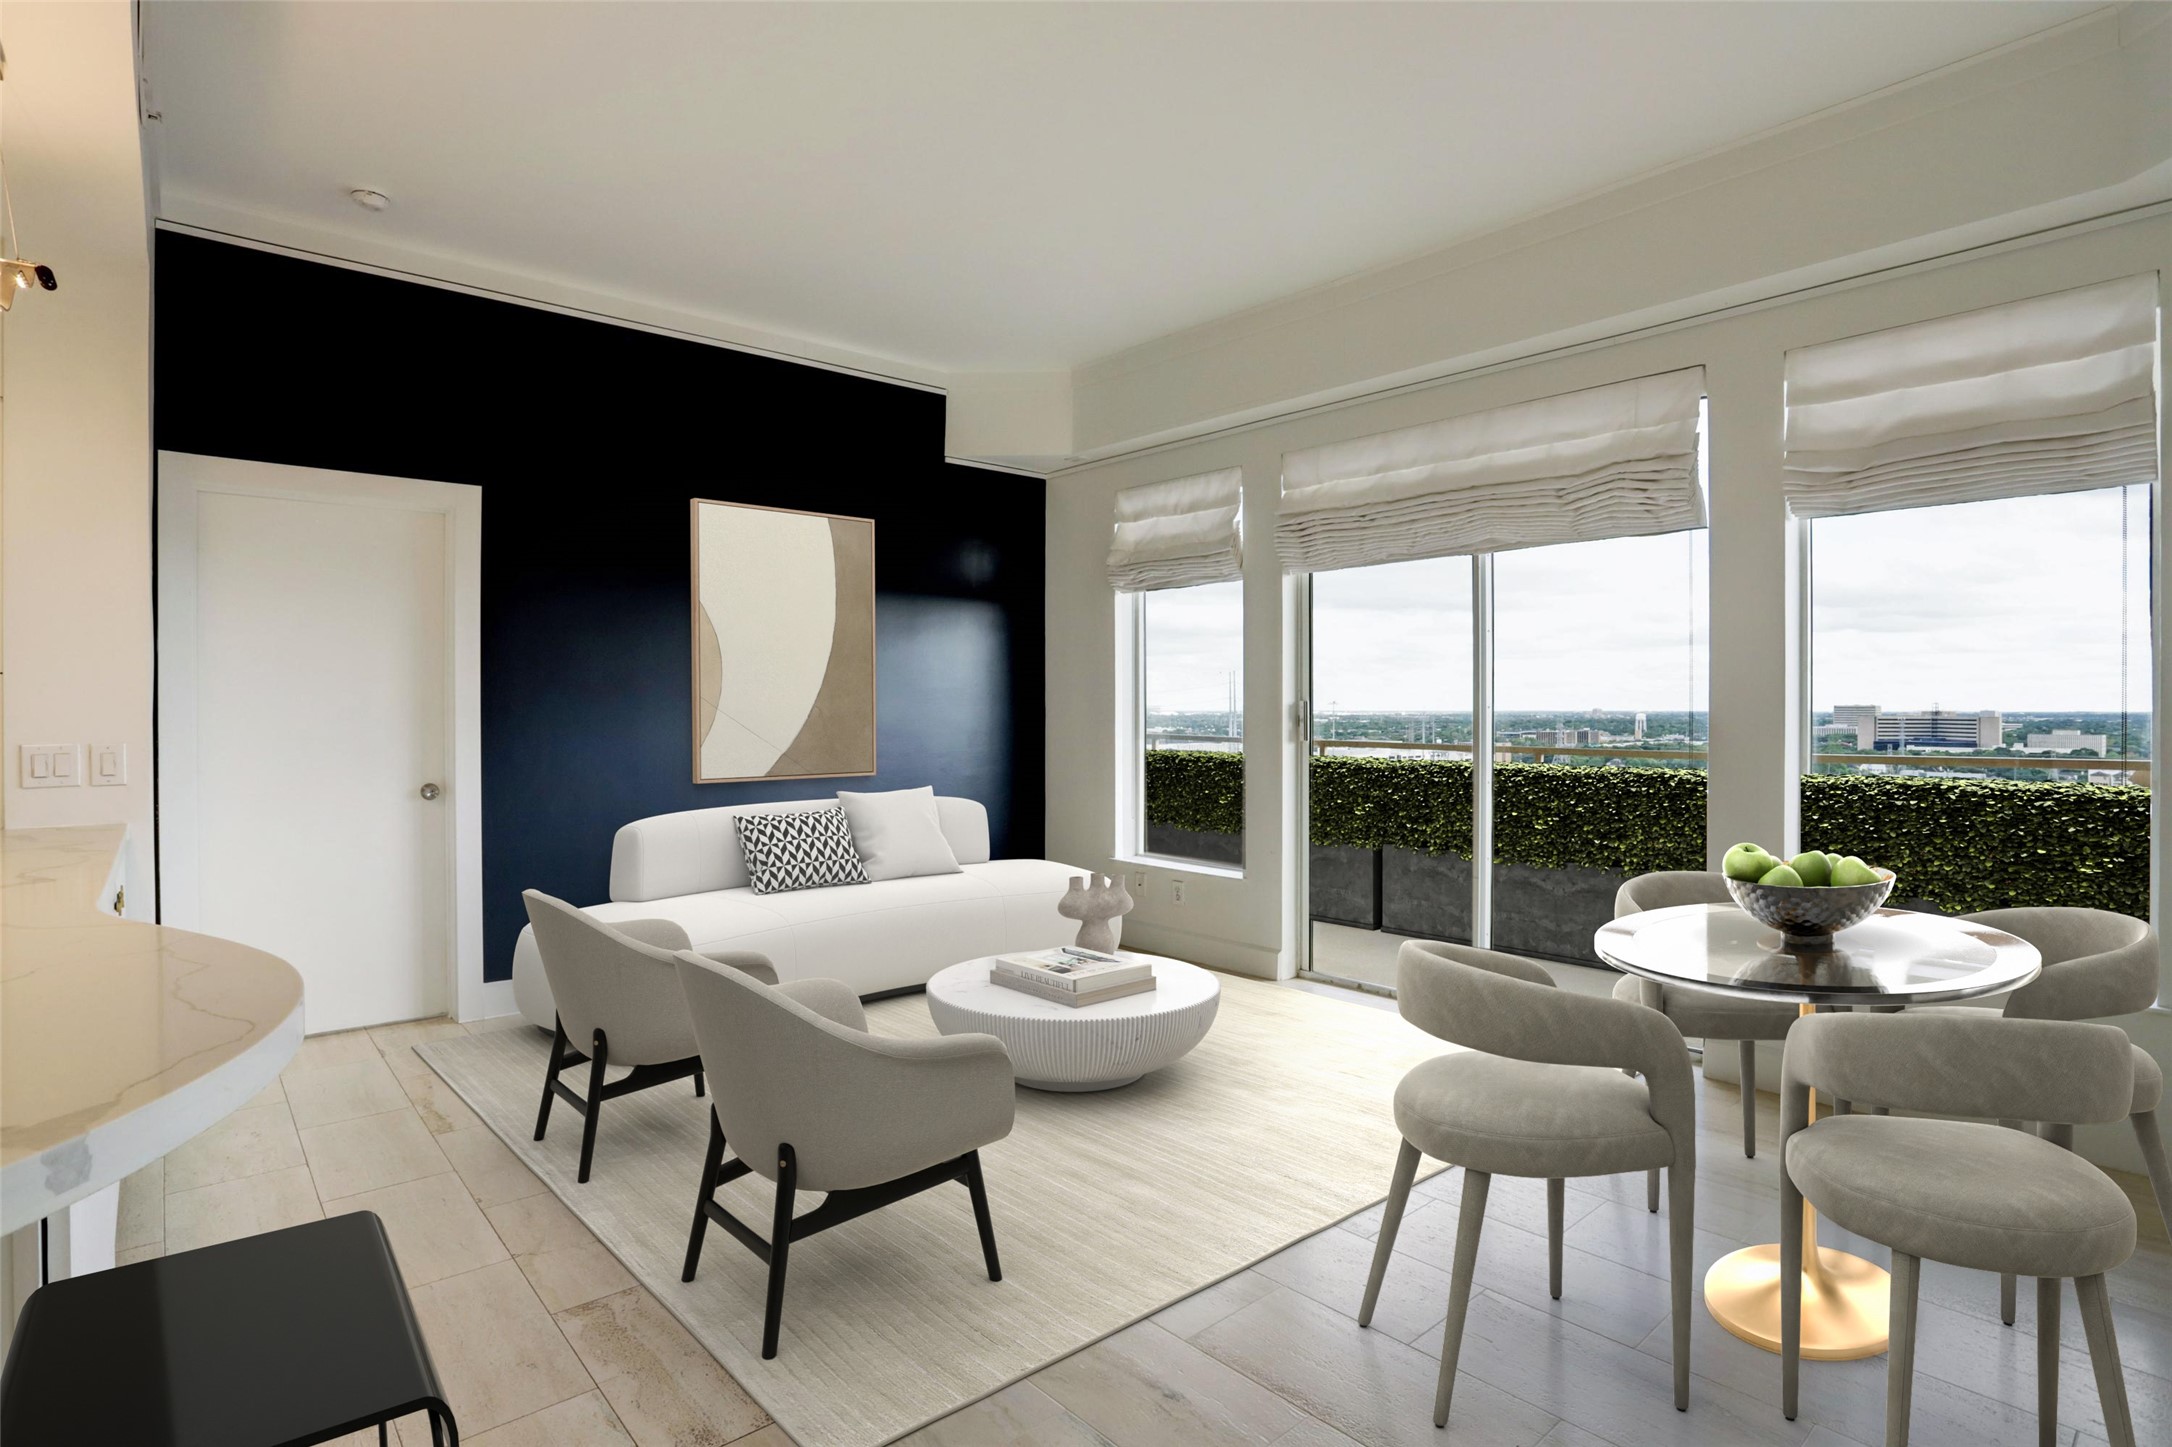 Living room with Travertine floors and access to the expansive balcony . Image shown virtually staged.